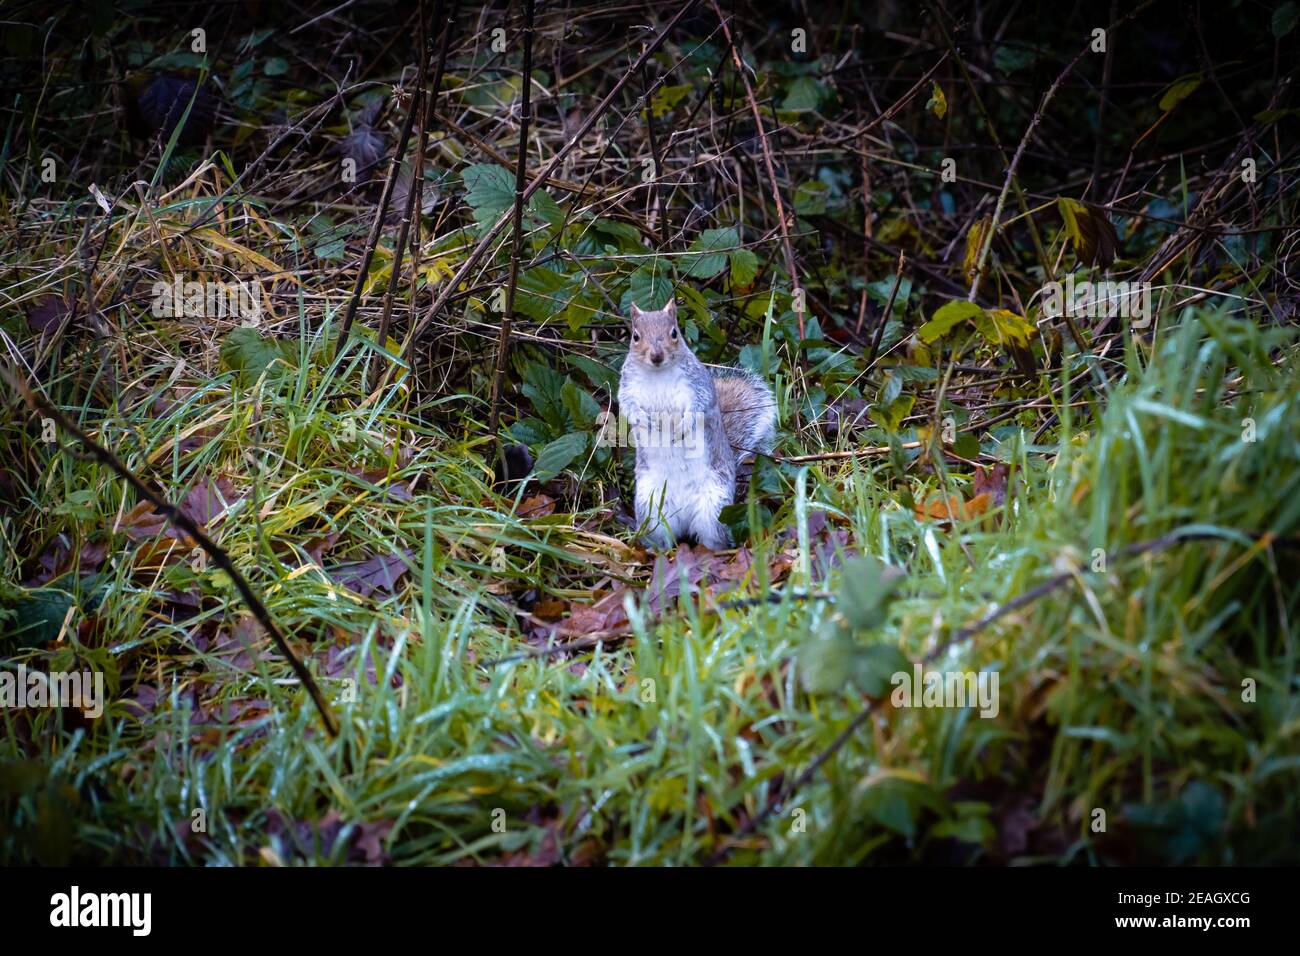 A lonely squirrel in the bush. Stock Photo